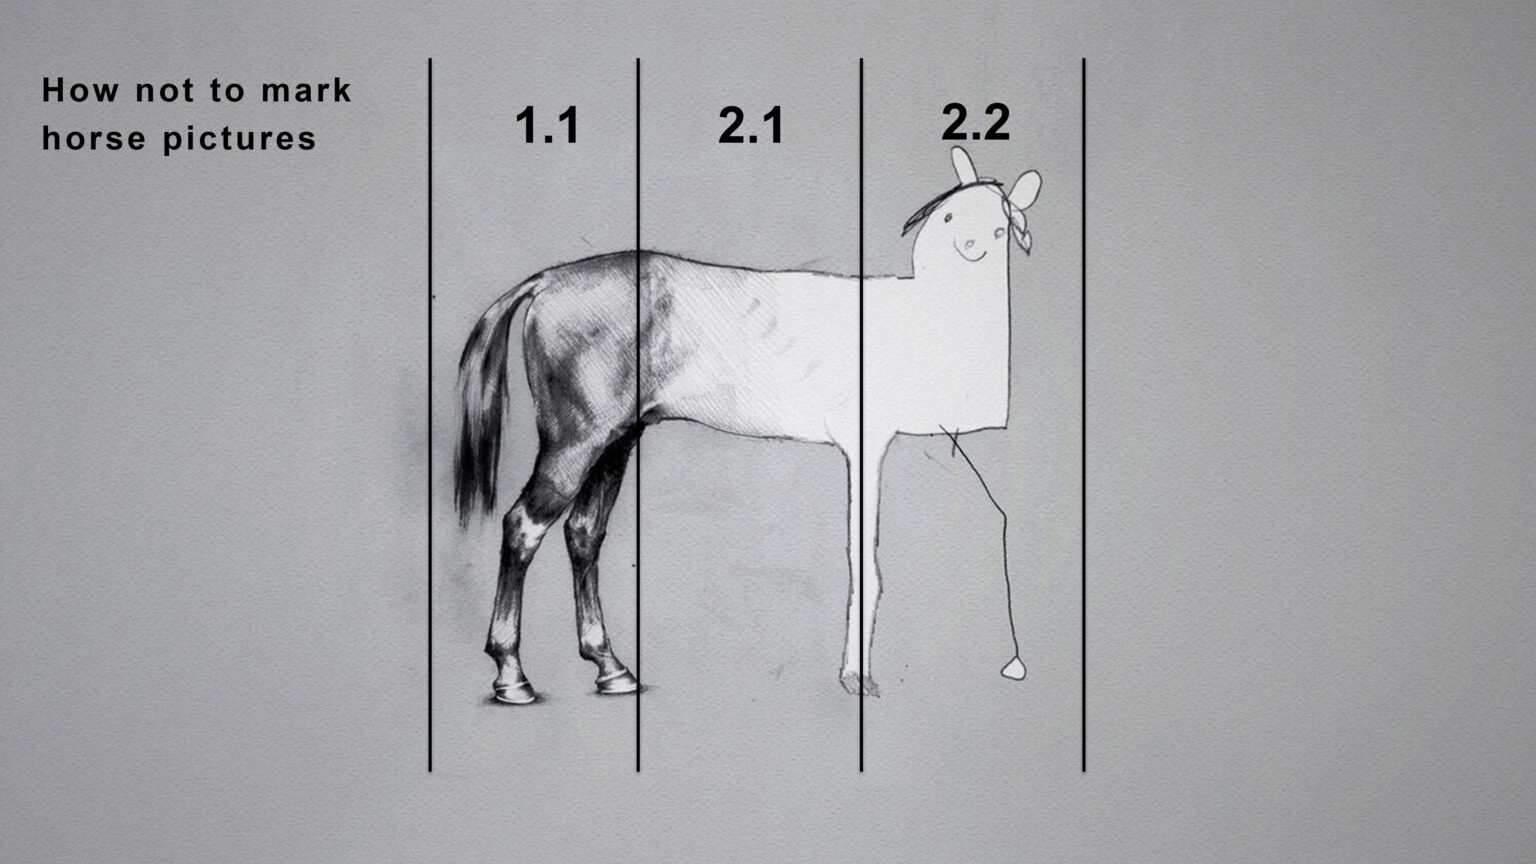 Drawing of a horse at different levels of fidelity, with lines indicating 1.1, 2.1, and 2.2 (which relate to classes of degree). The author is indicating that this approach is misguided.